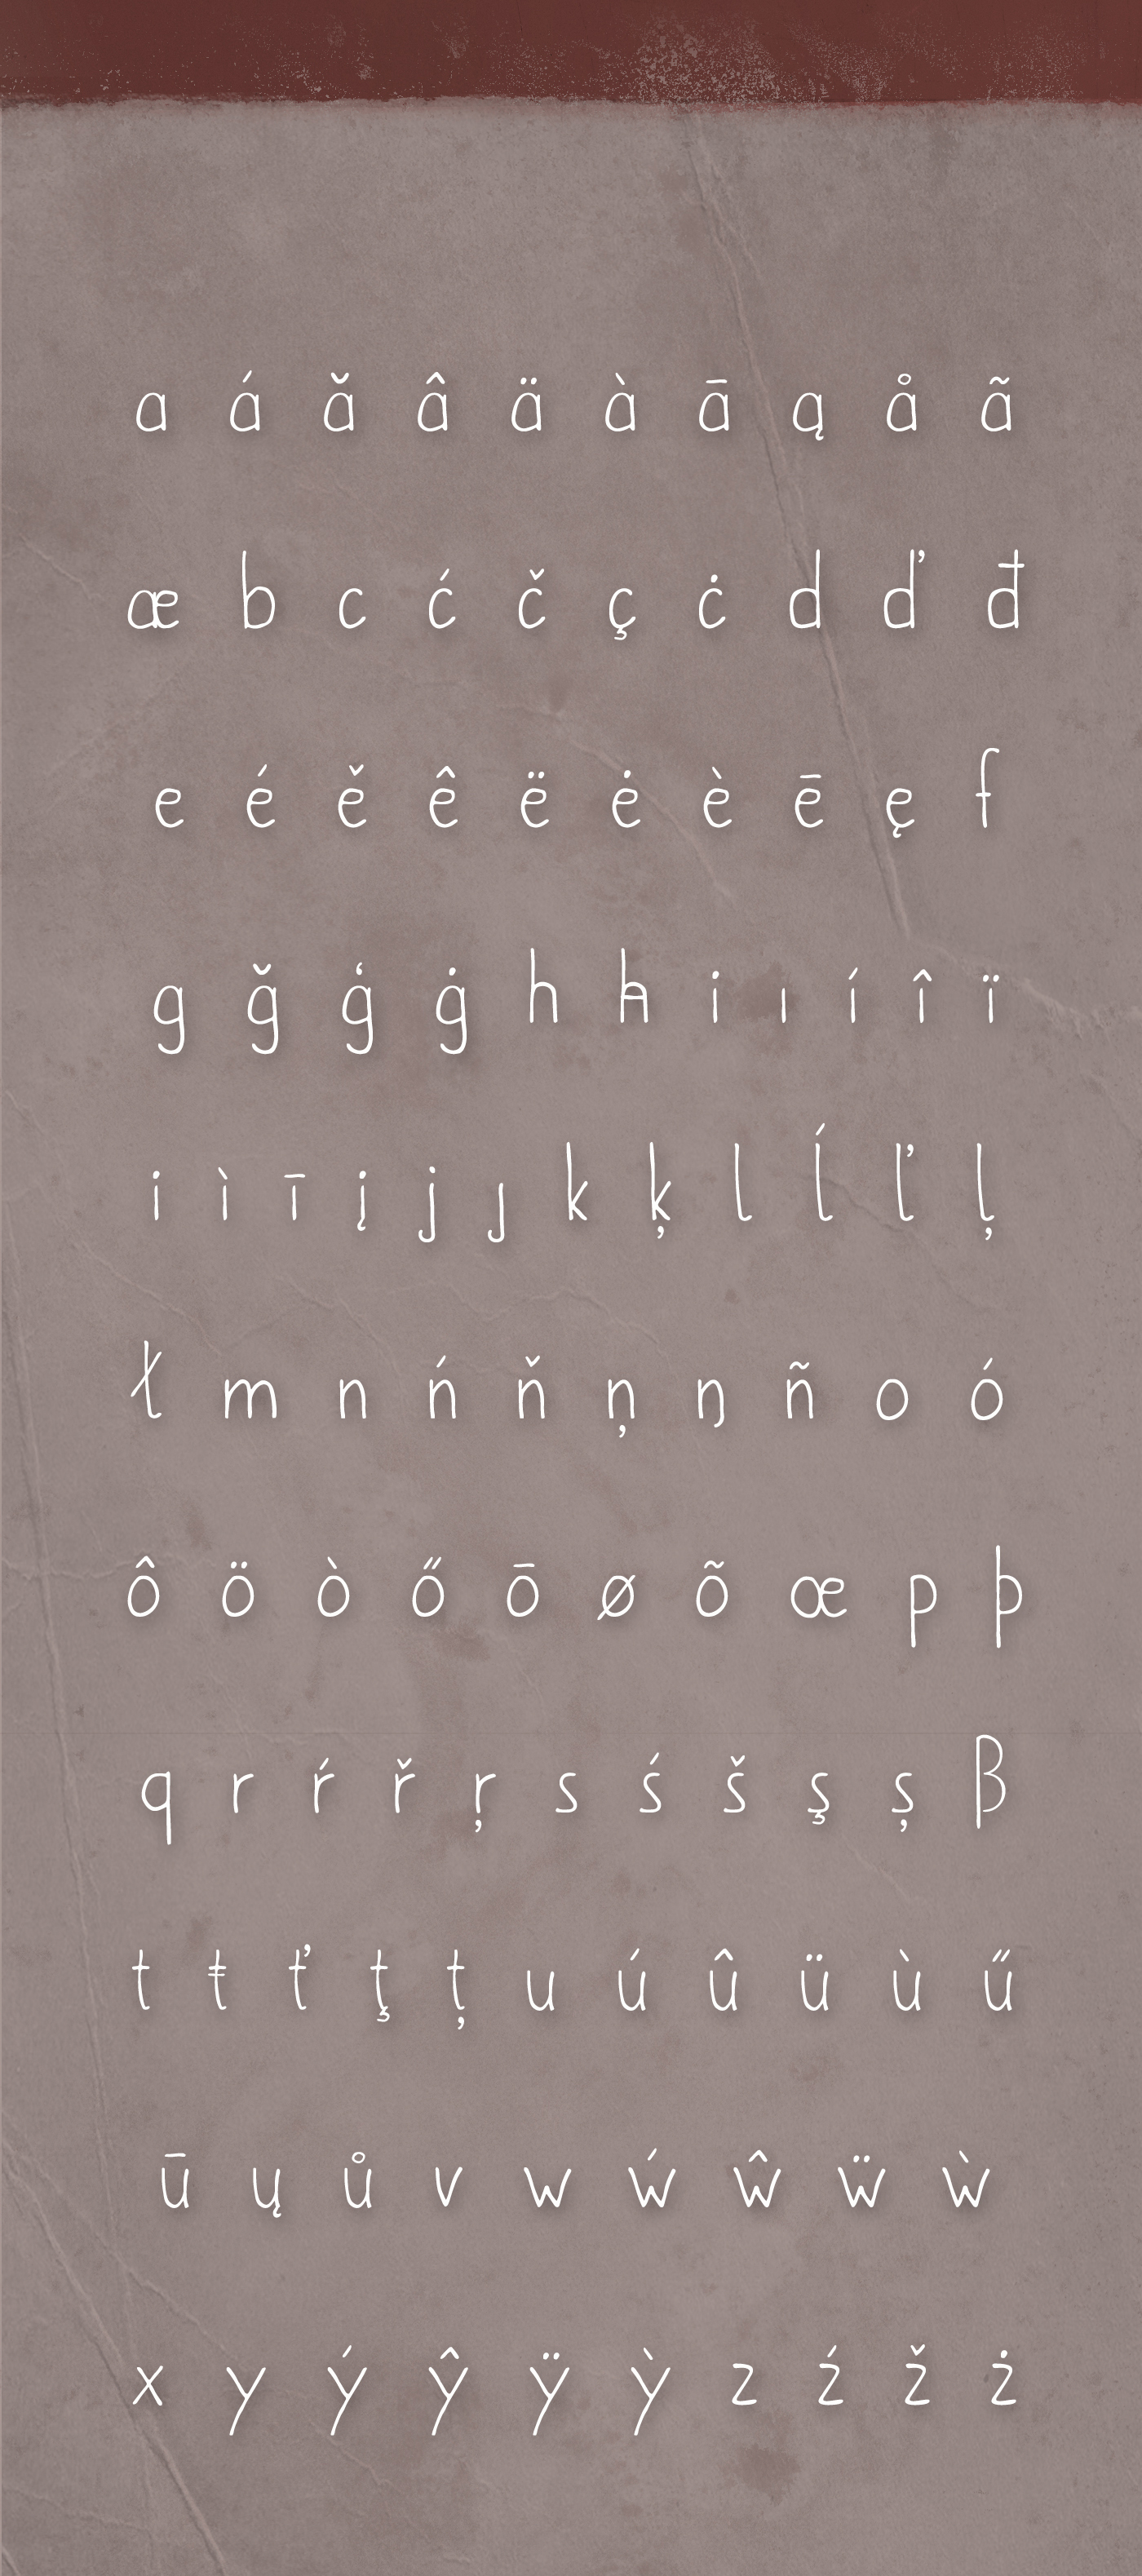 Metafors Font Free For Personal